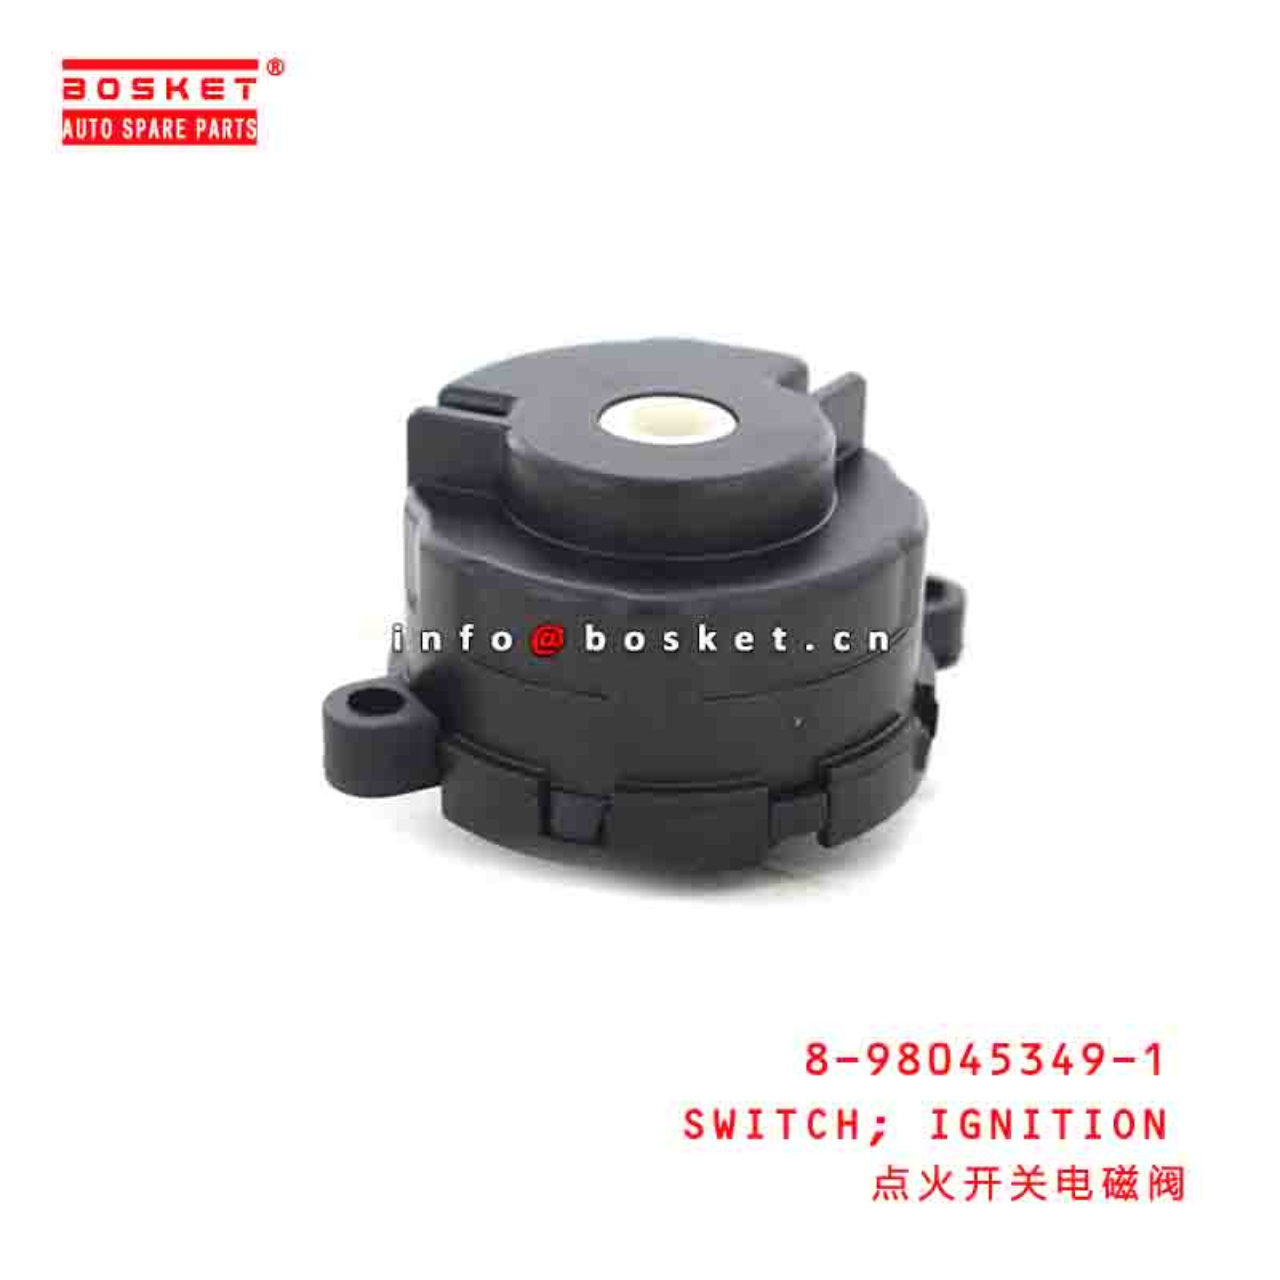 8-98037715-2 6107463-CYZ14 8980377152 6107463CYZ14 QINGLING FRONT PROTECTOR LH Suitable FOR ISUZU VC